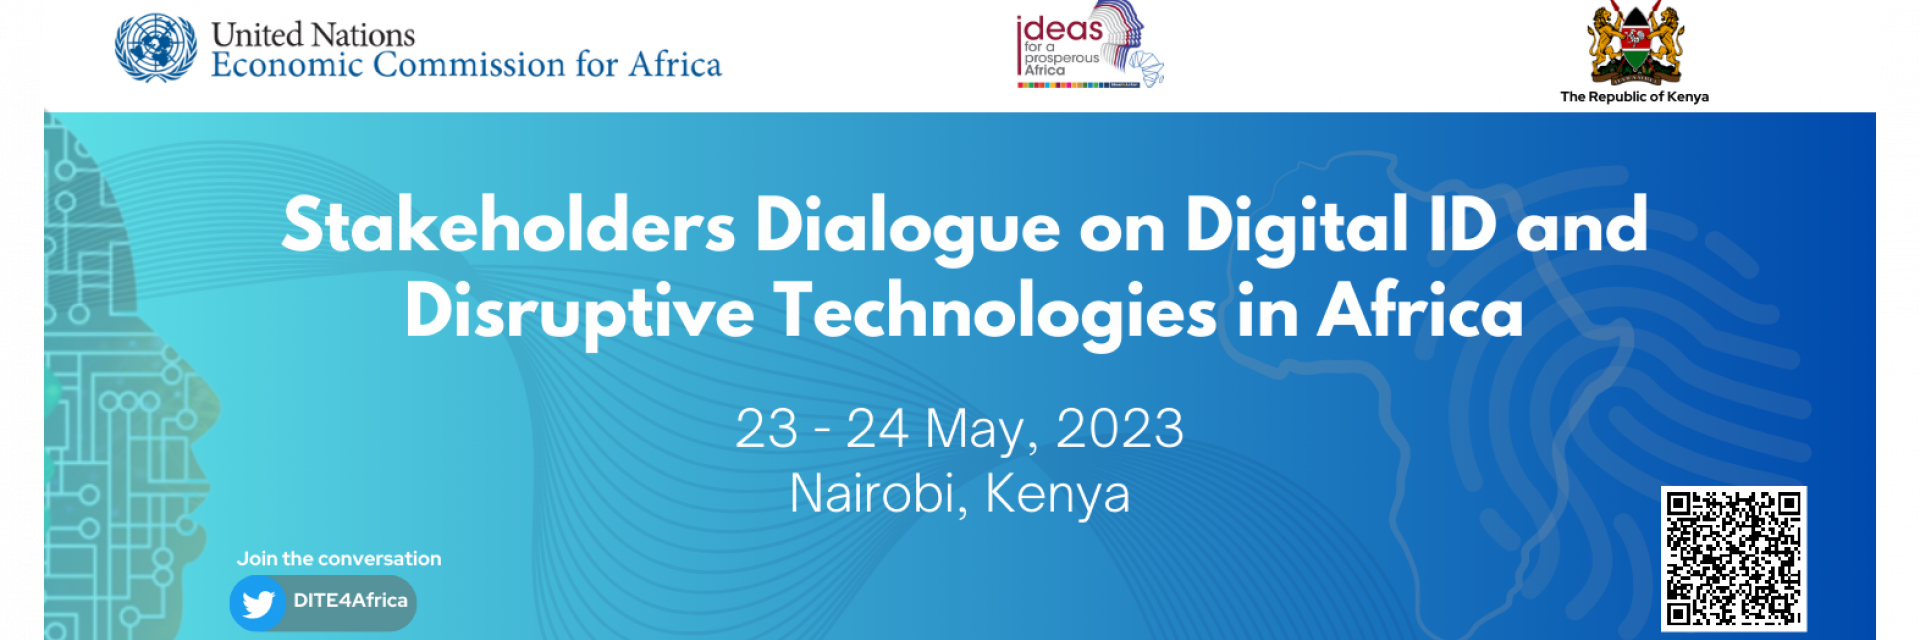 Implementing digital ID systems in Africa: ECA's Stakeholders Dialogue explores pathways for leveraging Digital ID Systems and disruptive technologies